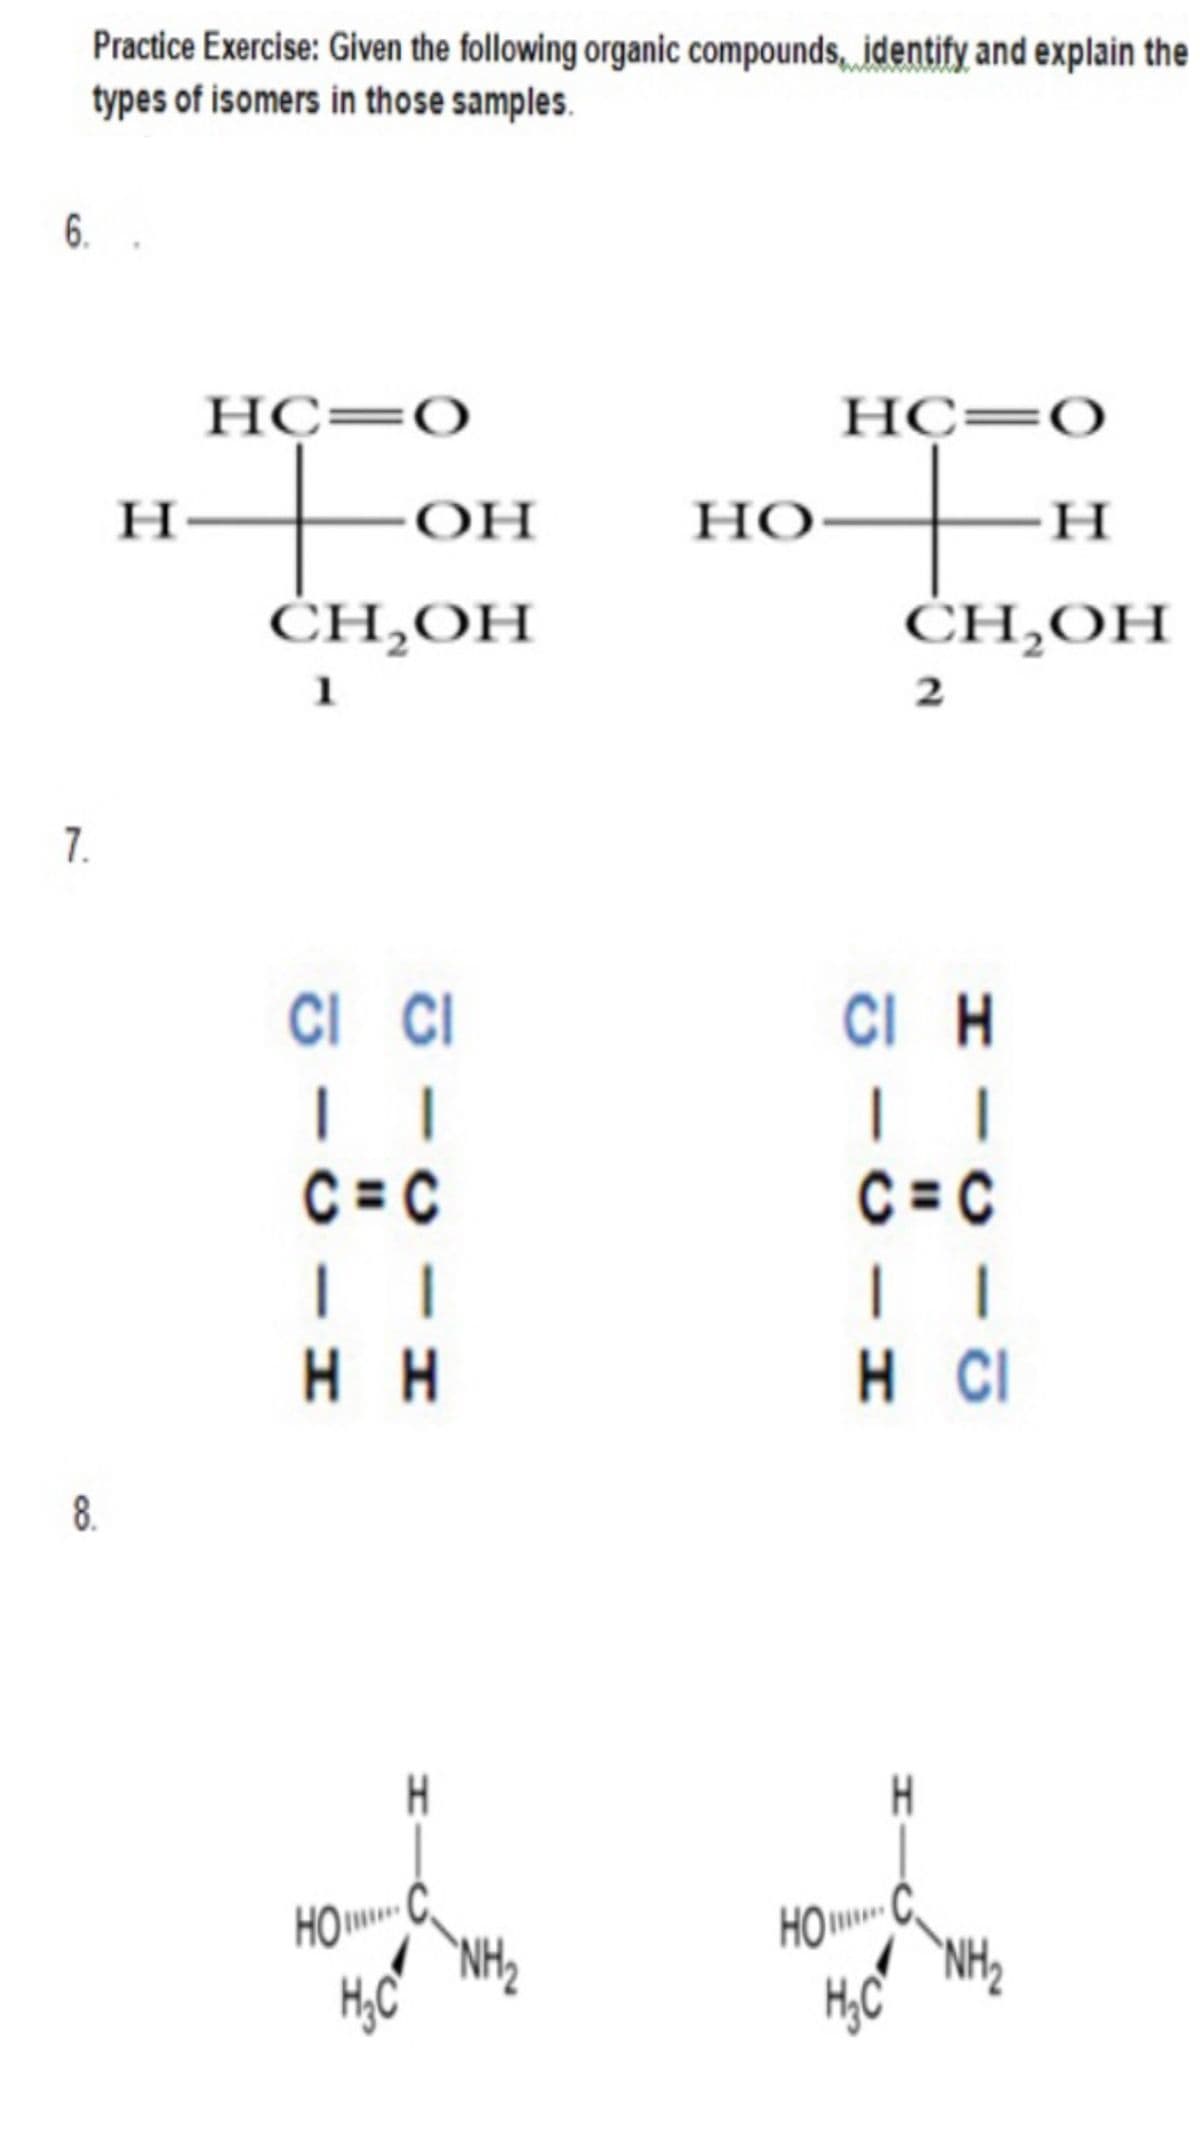 Practice Exercise: Given the following organic compounds, identify and explain the
types of isomers in those samples.
6.
НС—О
HC=
НС—О
H
OH
Но
H
CH,ОН
ĊH,OH
1
7.
CI CI
CI H
| |
C = C
|
C = C
H H
H CI
8.
H.
HO
`NH2
HOC,
'NH2
H,C
H,C
|
2.
H-
